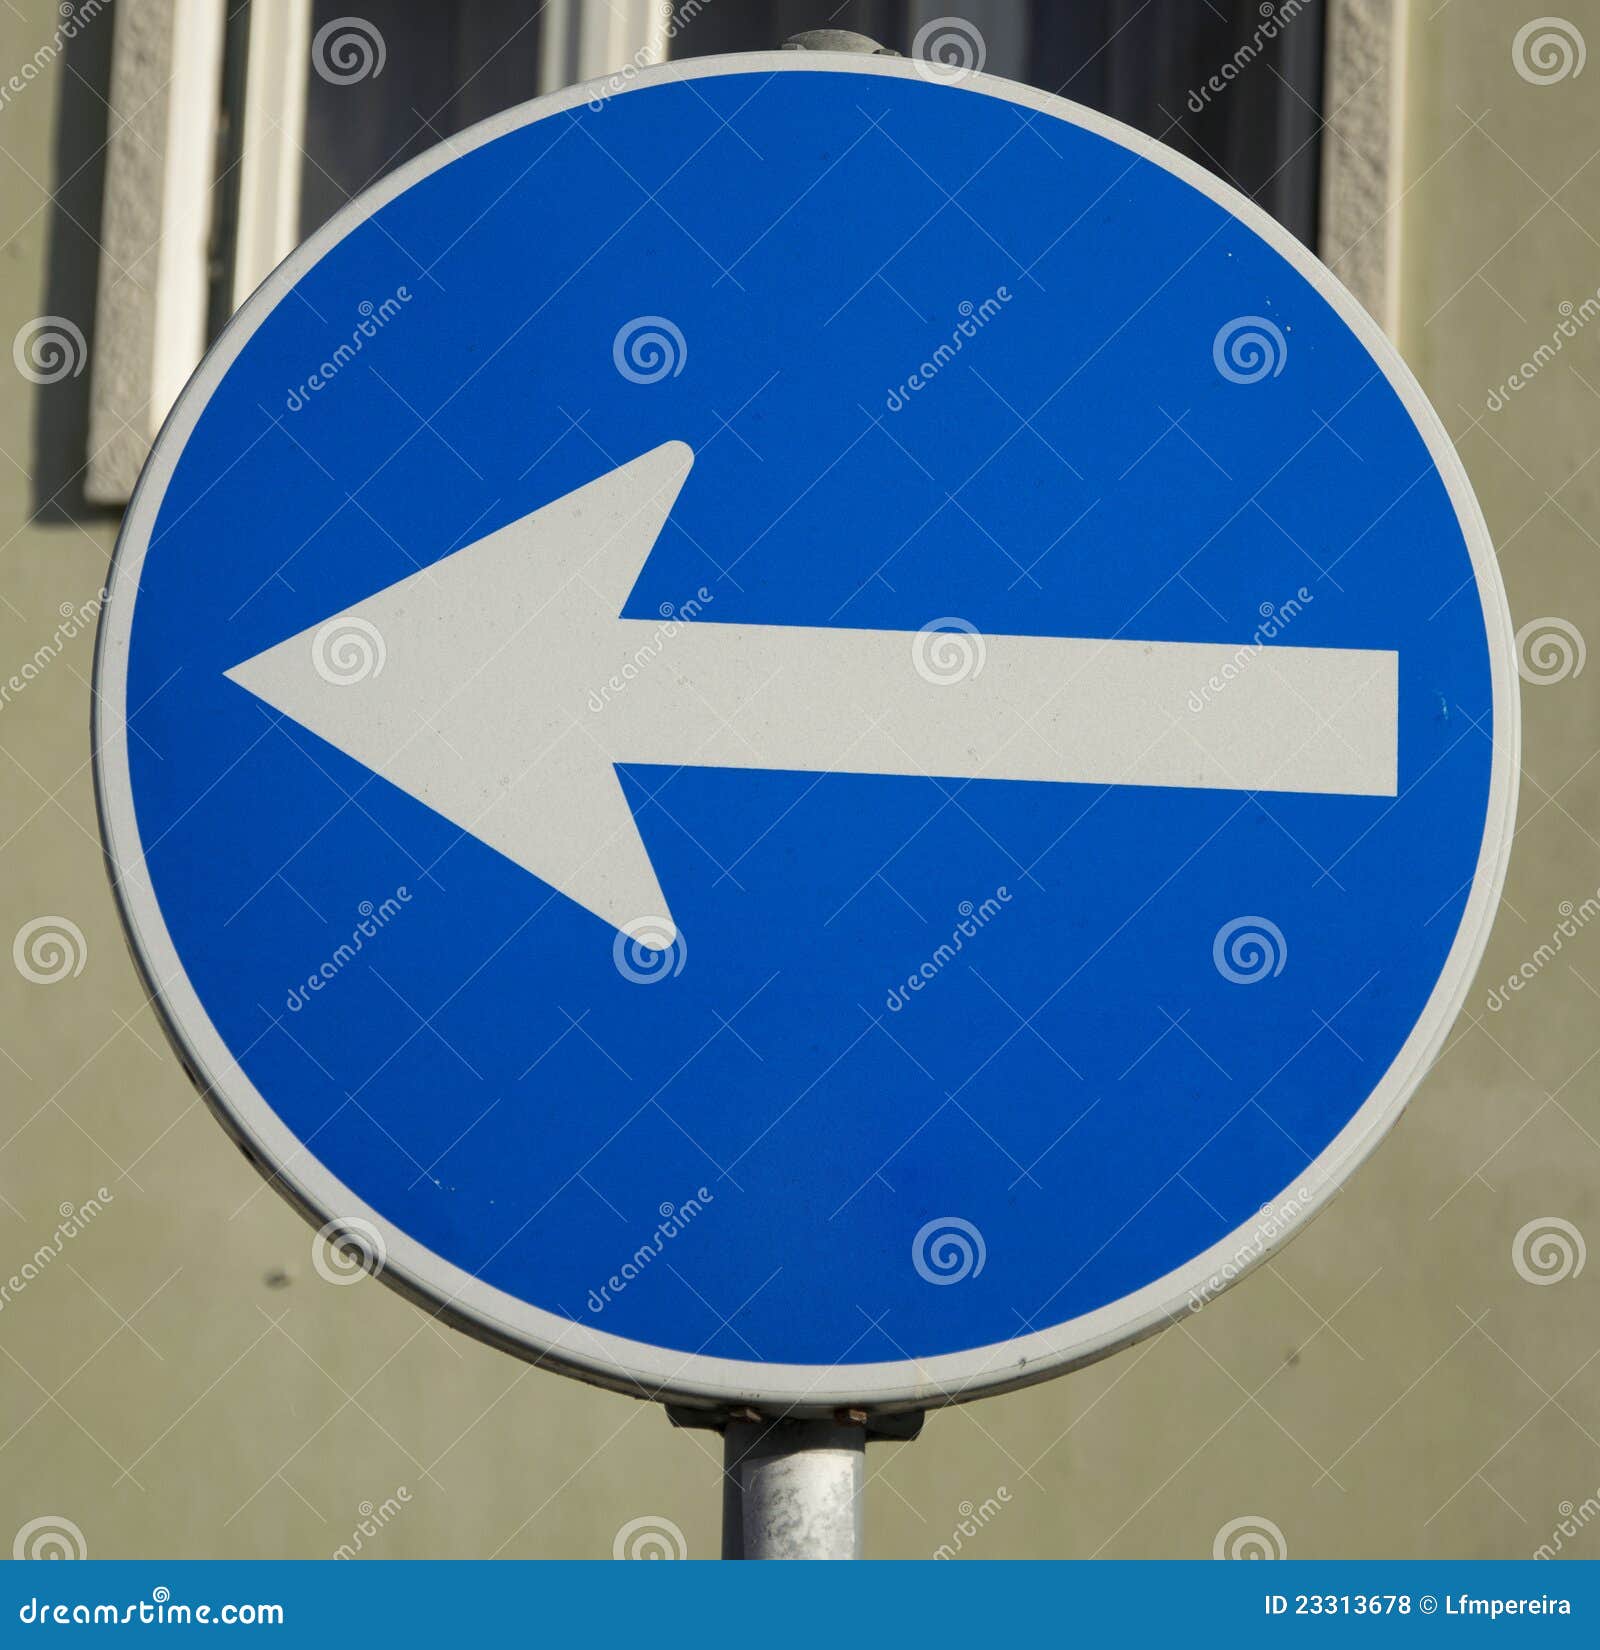 One way road sign stock photo. Image of right, notice ...
 One Way Street Signs